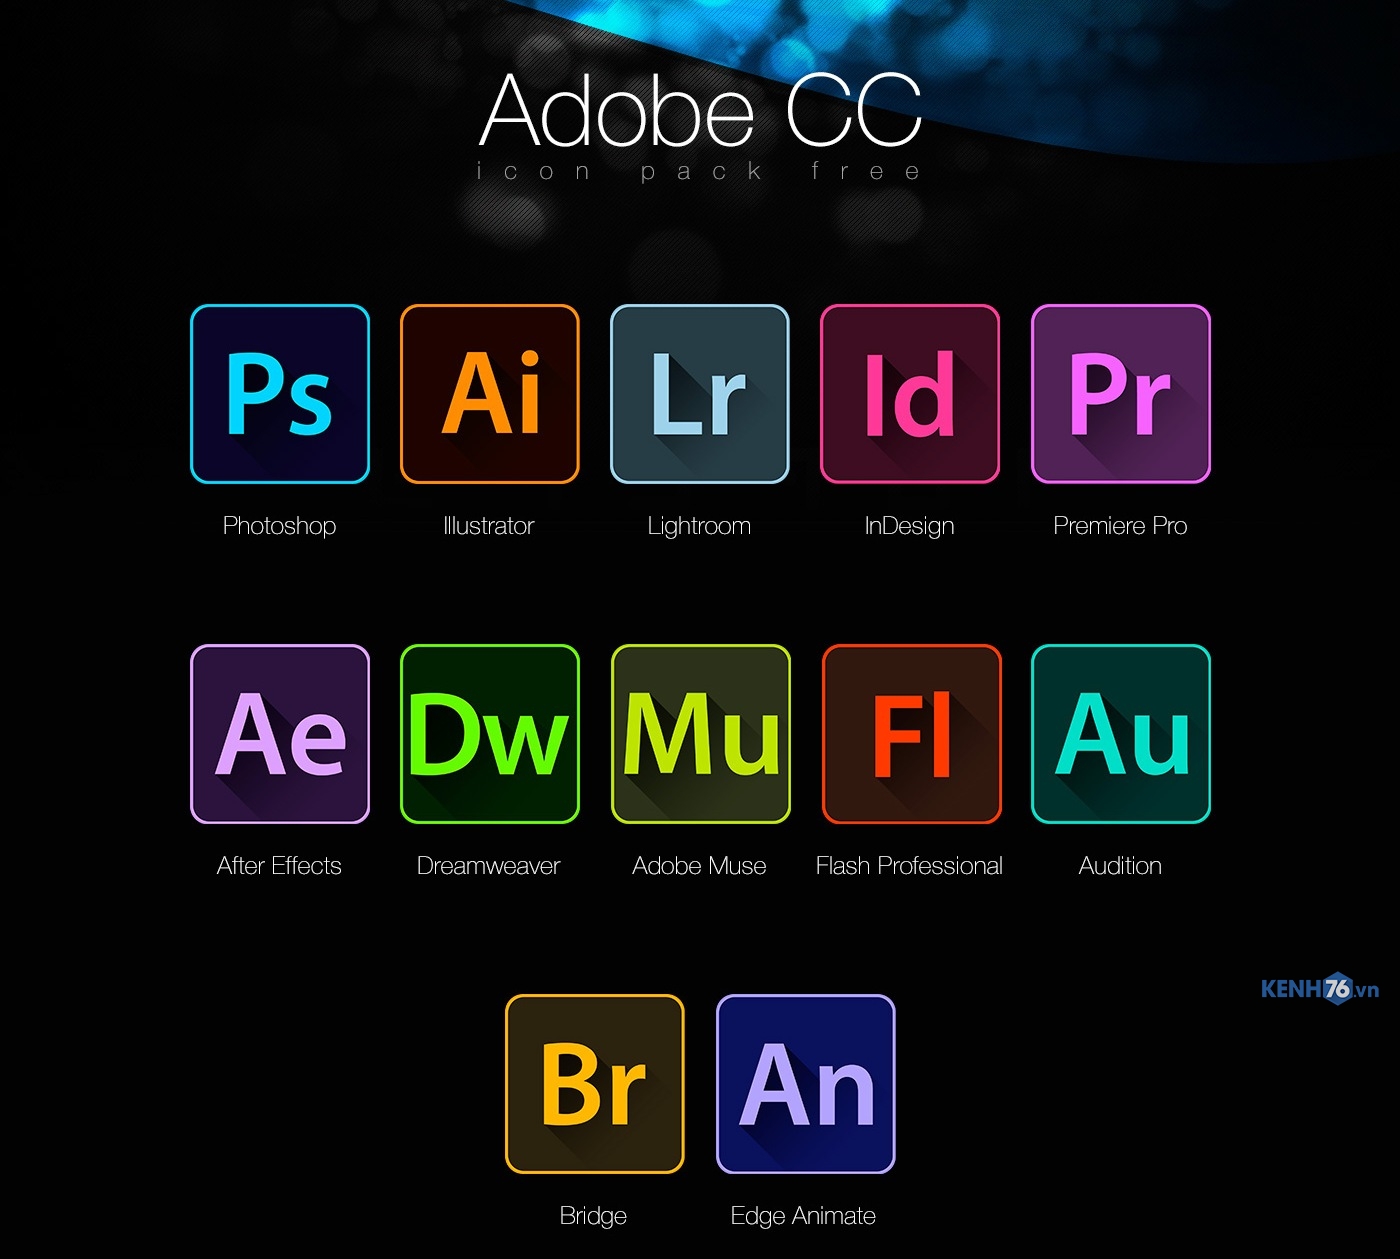 Adobe creative cloud 2017 master collection crack free download adobe acrobat dc free download for windows 8.1